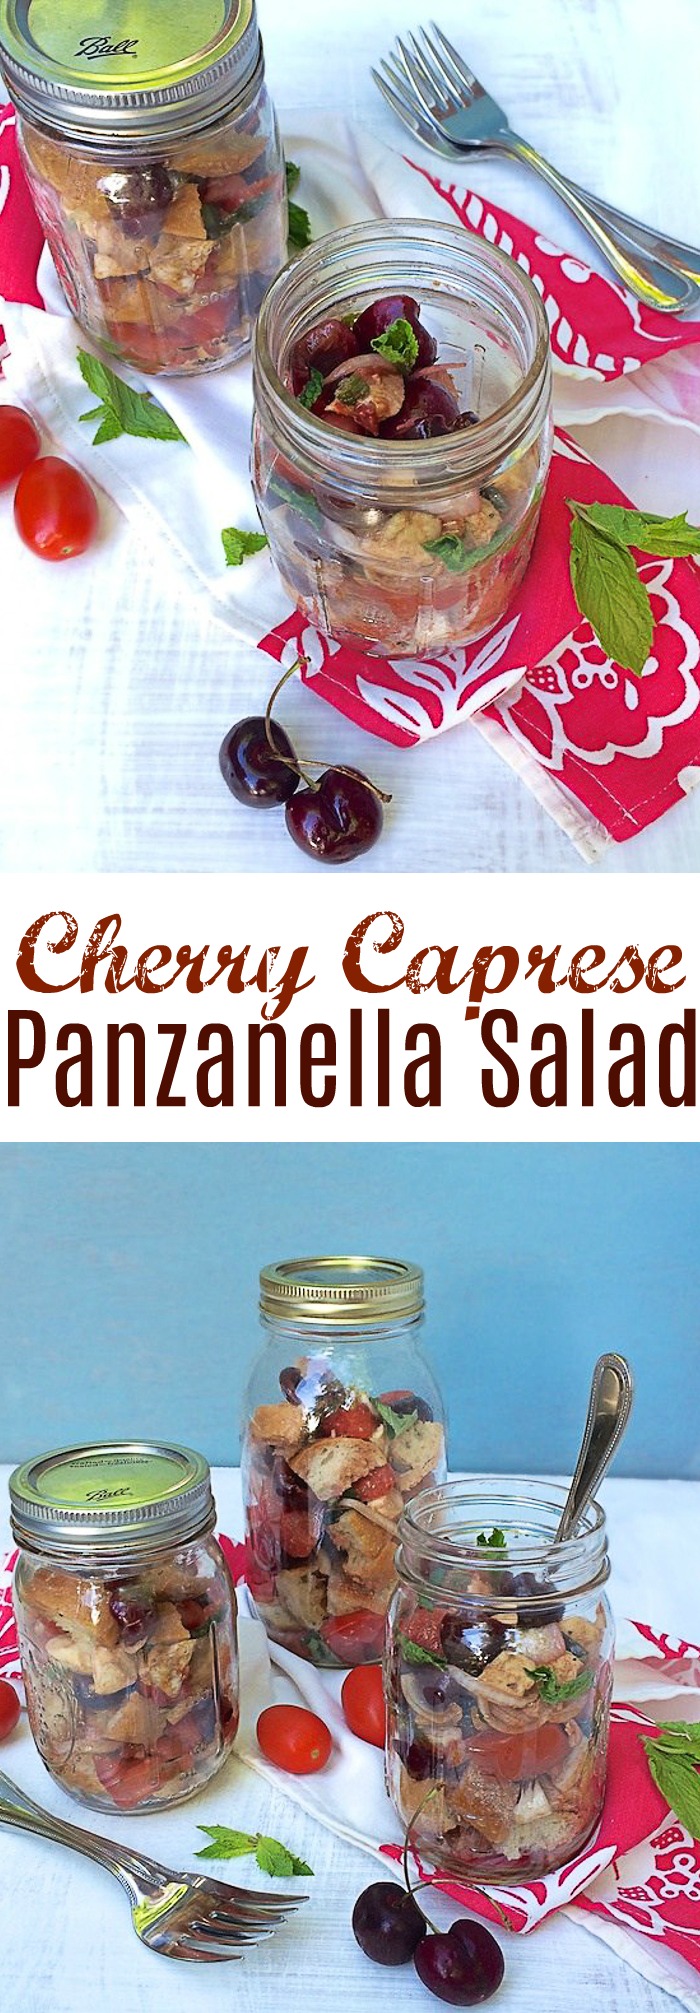 A portable summer salad perfect for the beach or a picnic featuring cherries, tomatoes, basil, mint, fresh mozzarella and bread - recipe for Cherry Caprese Panzanella at Teaspoonofspice.com